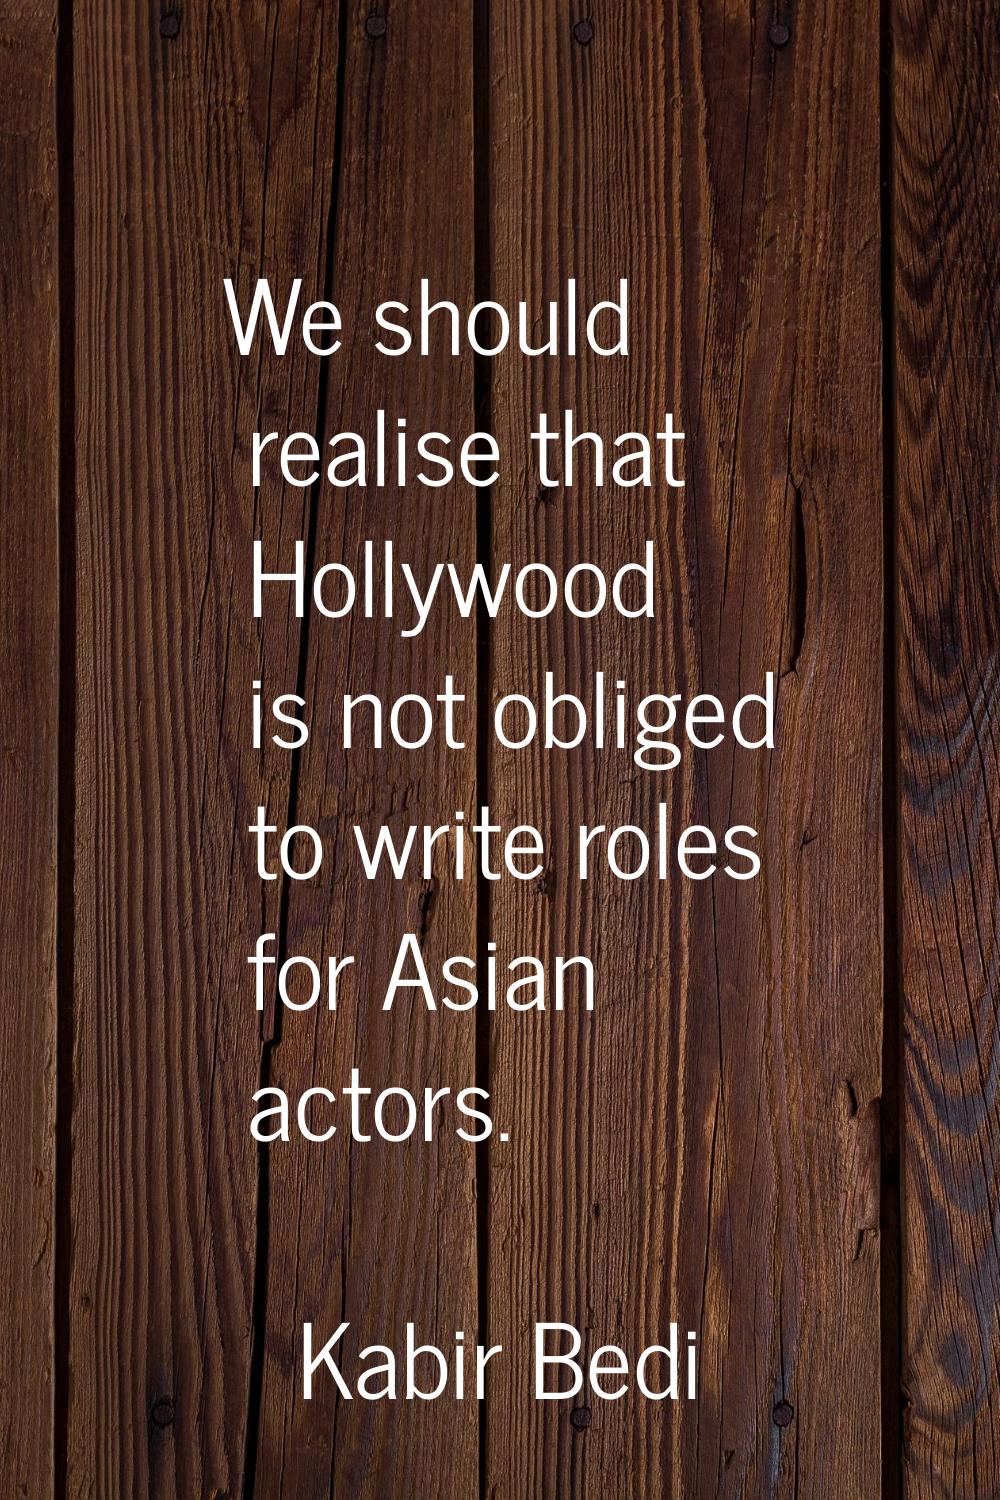 We should realise that Hollywood is not obliged to write roles for Asian actors.